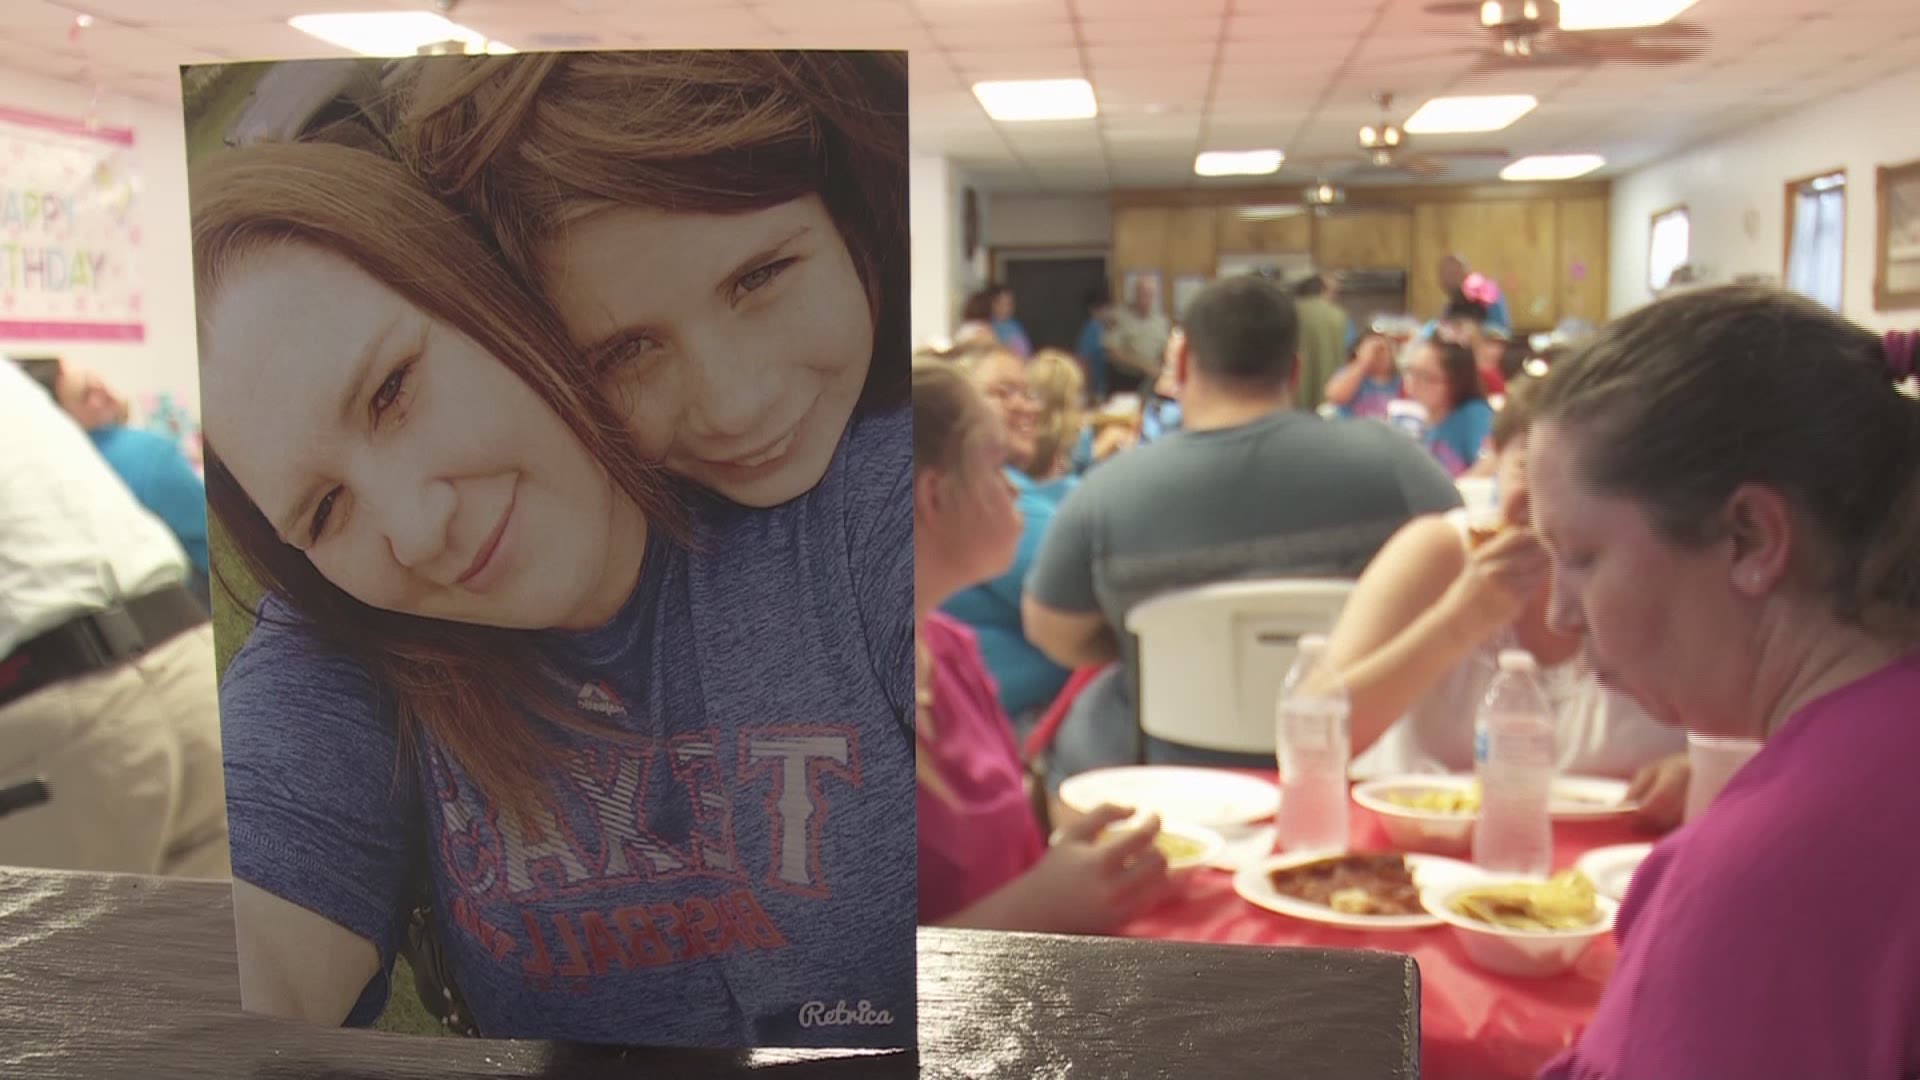 On Monday, the Sutherland Springs community gathered together to celebrate the birthday of Haley Krueger, who was killed in the shooting.